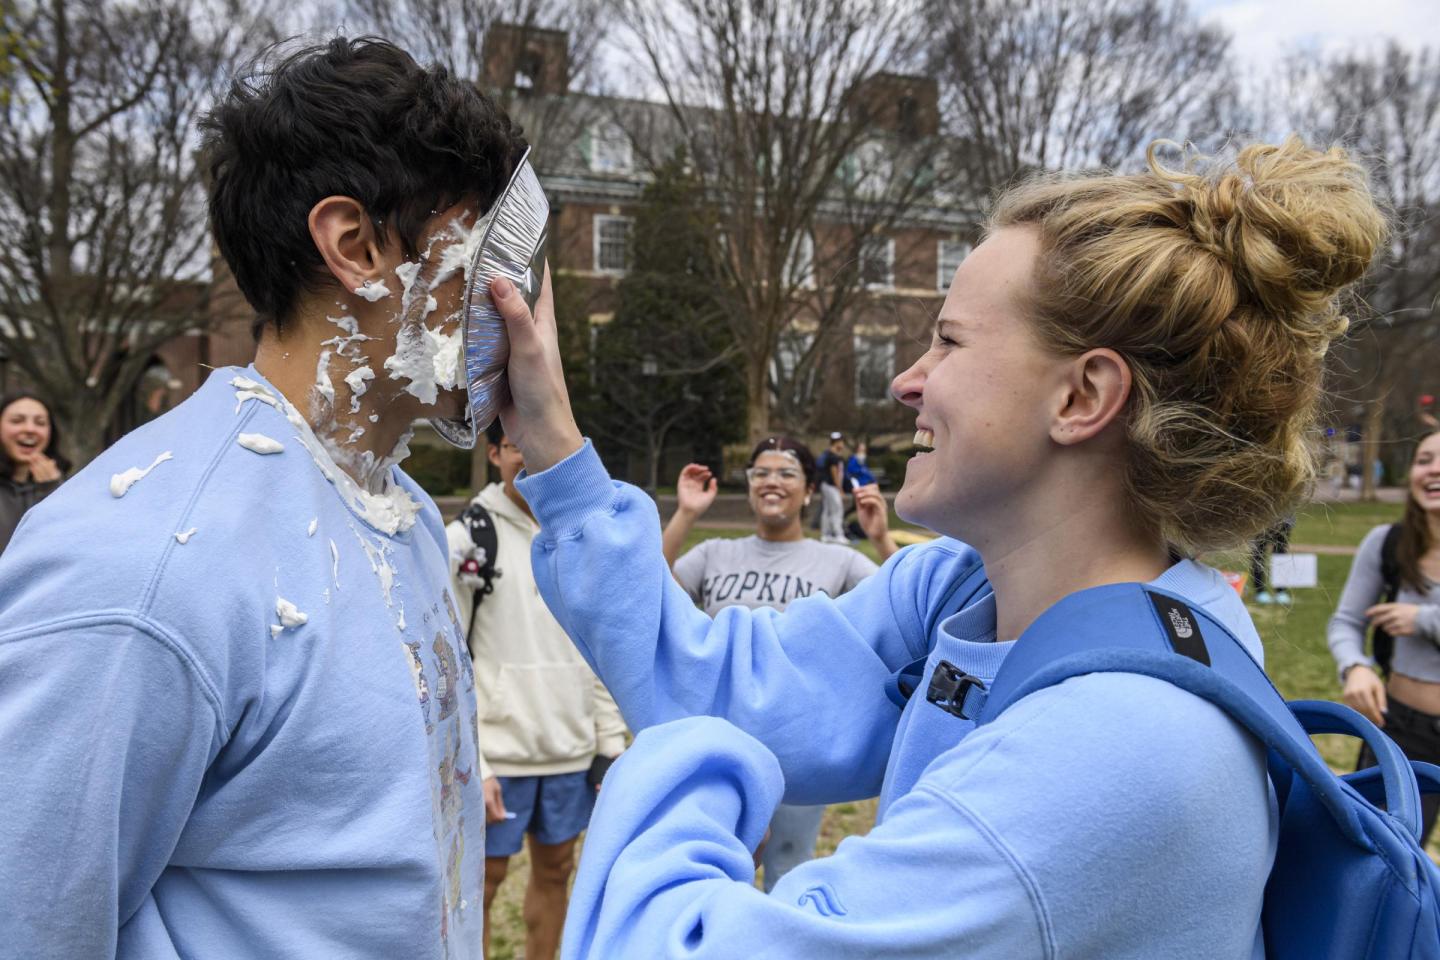 A student pies another student in the face.